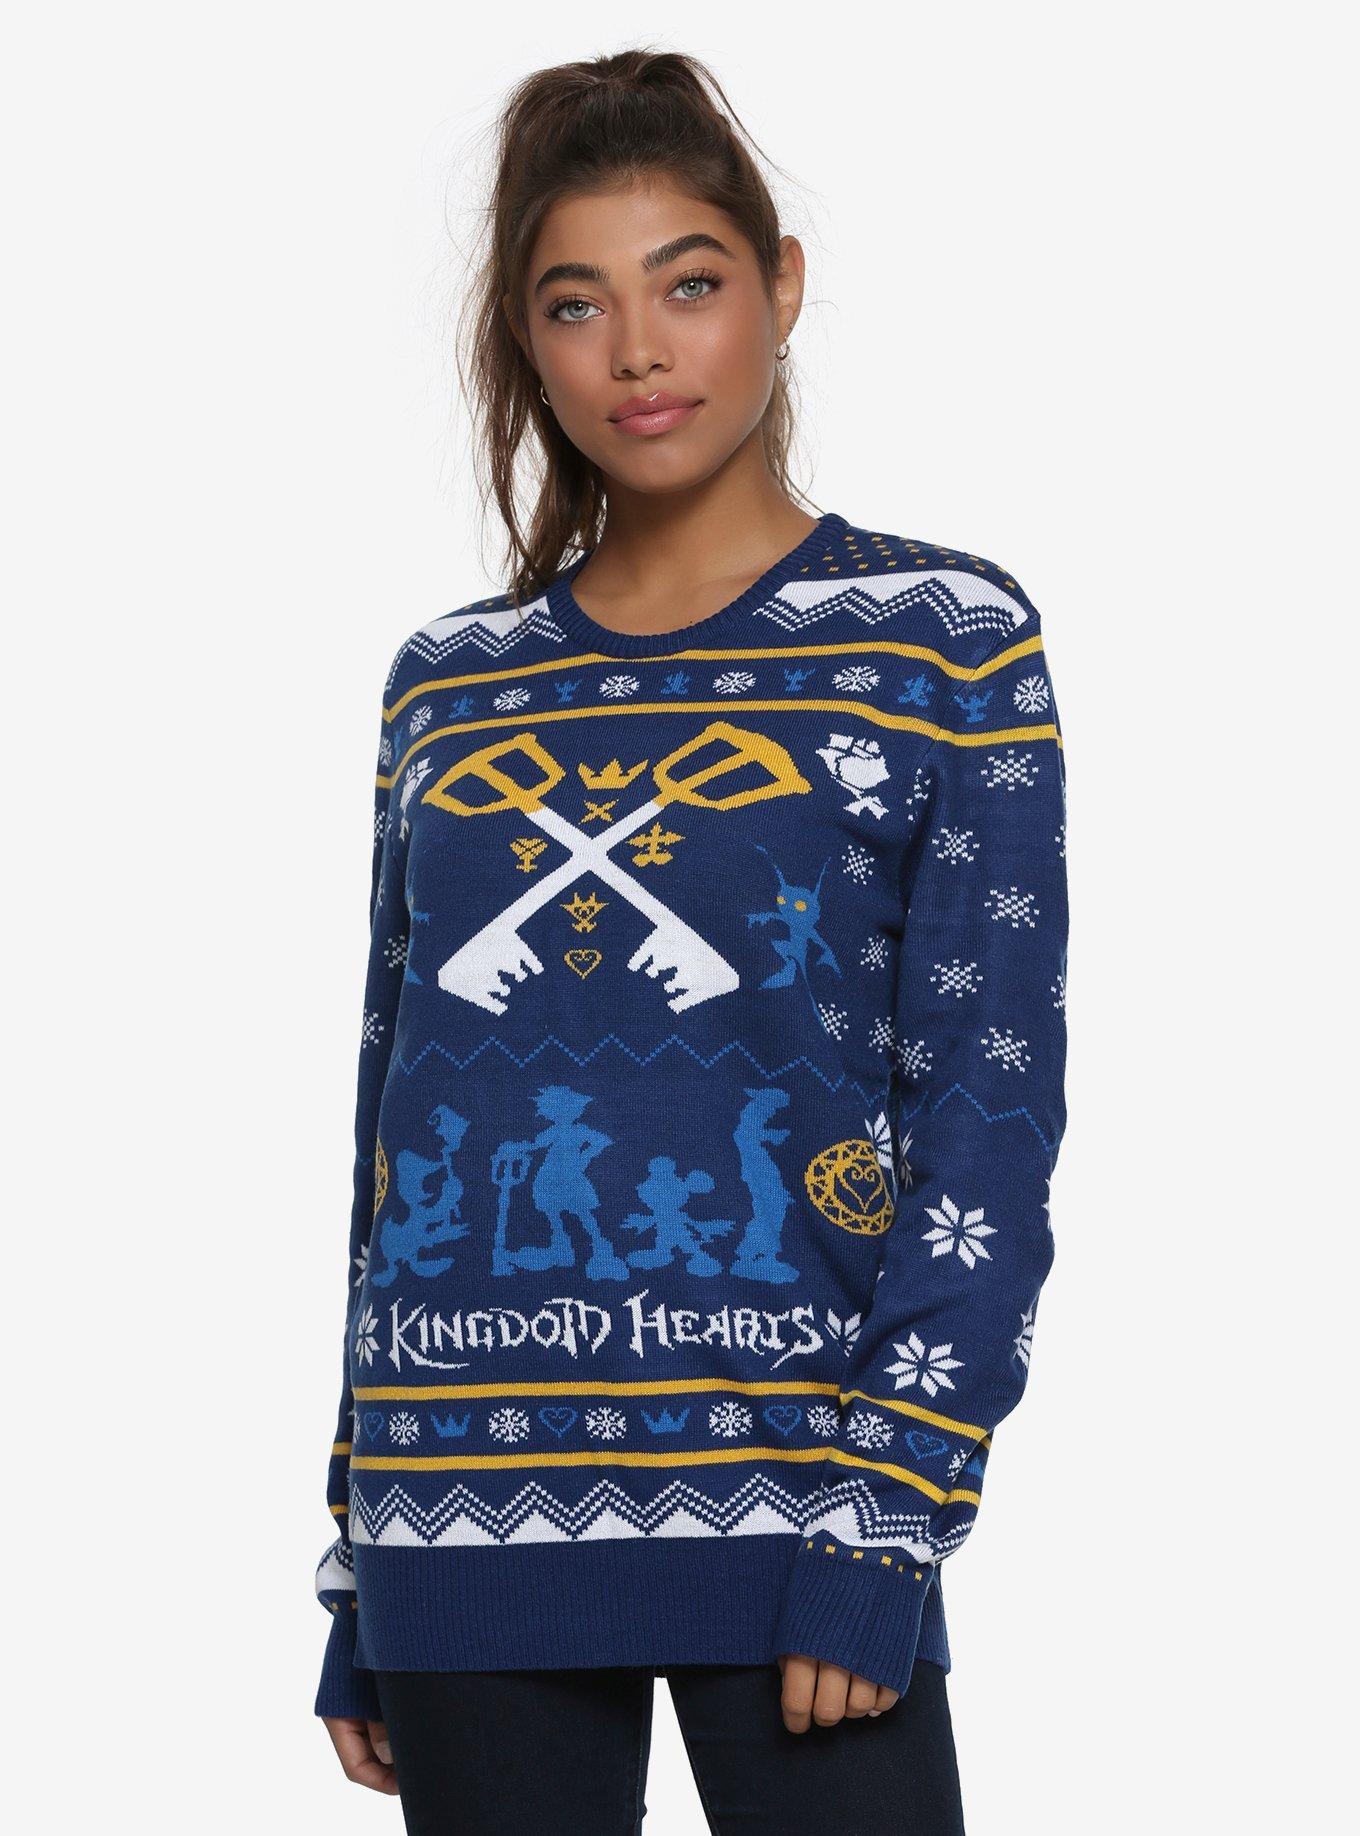 Disney Kingdom Hearts Holiday Sweater - BoxLunch Exclusive, BLUE, hi-res